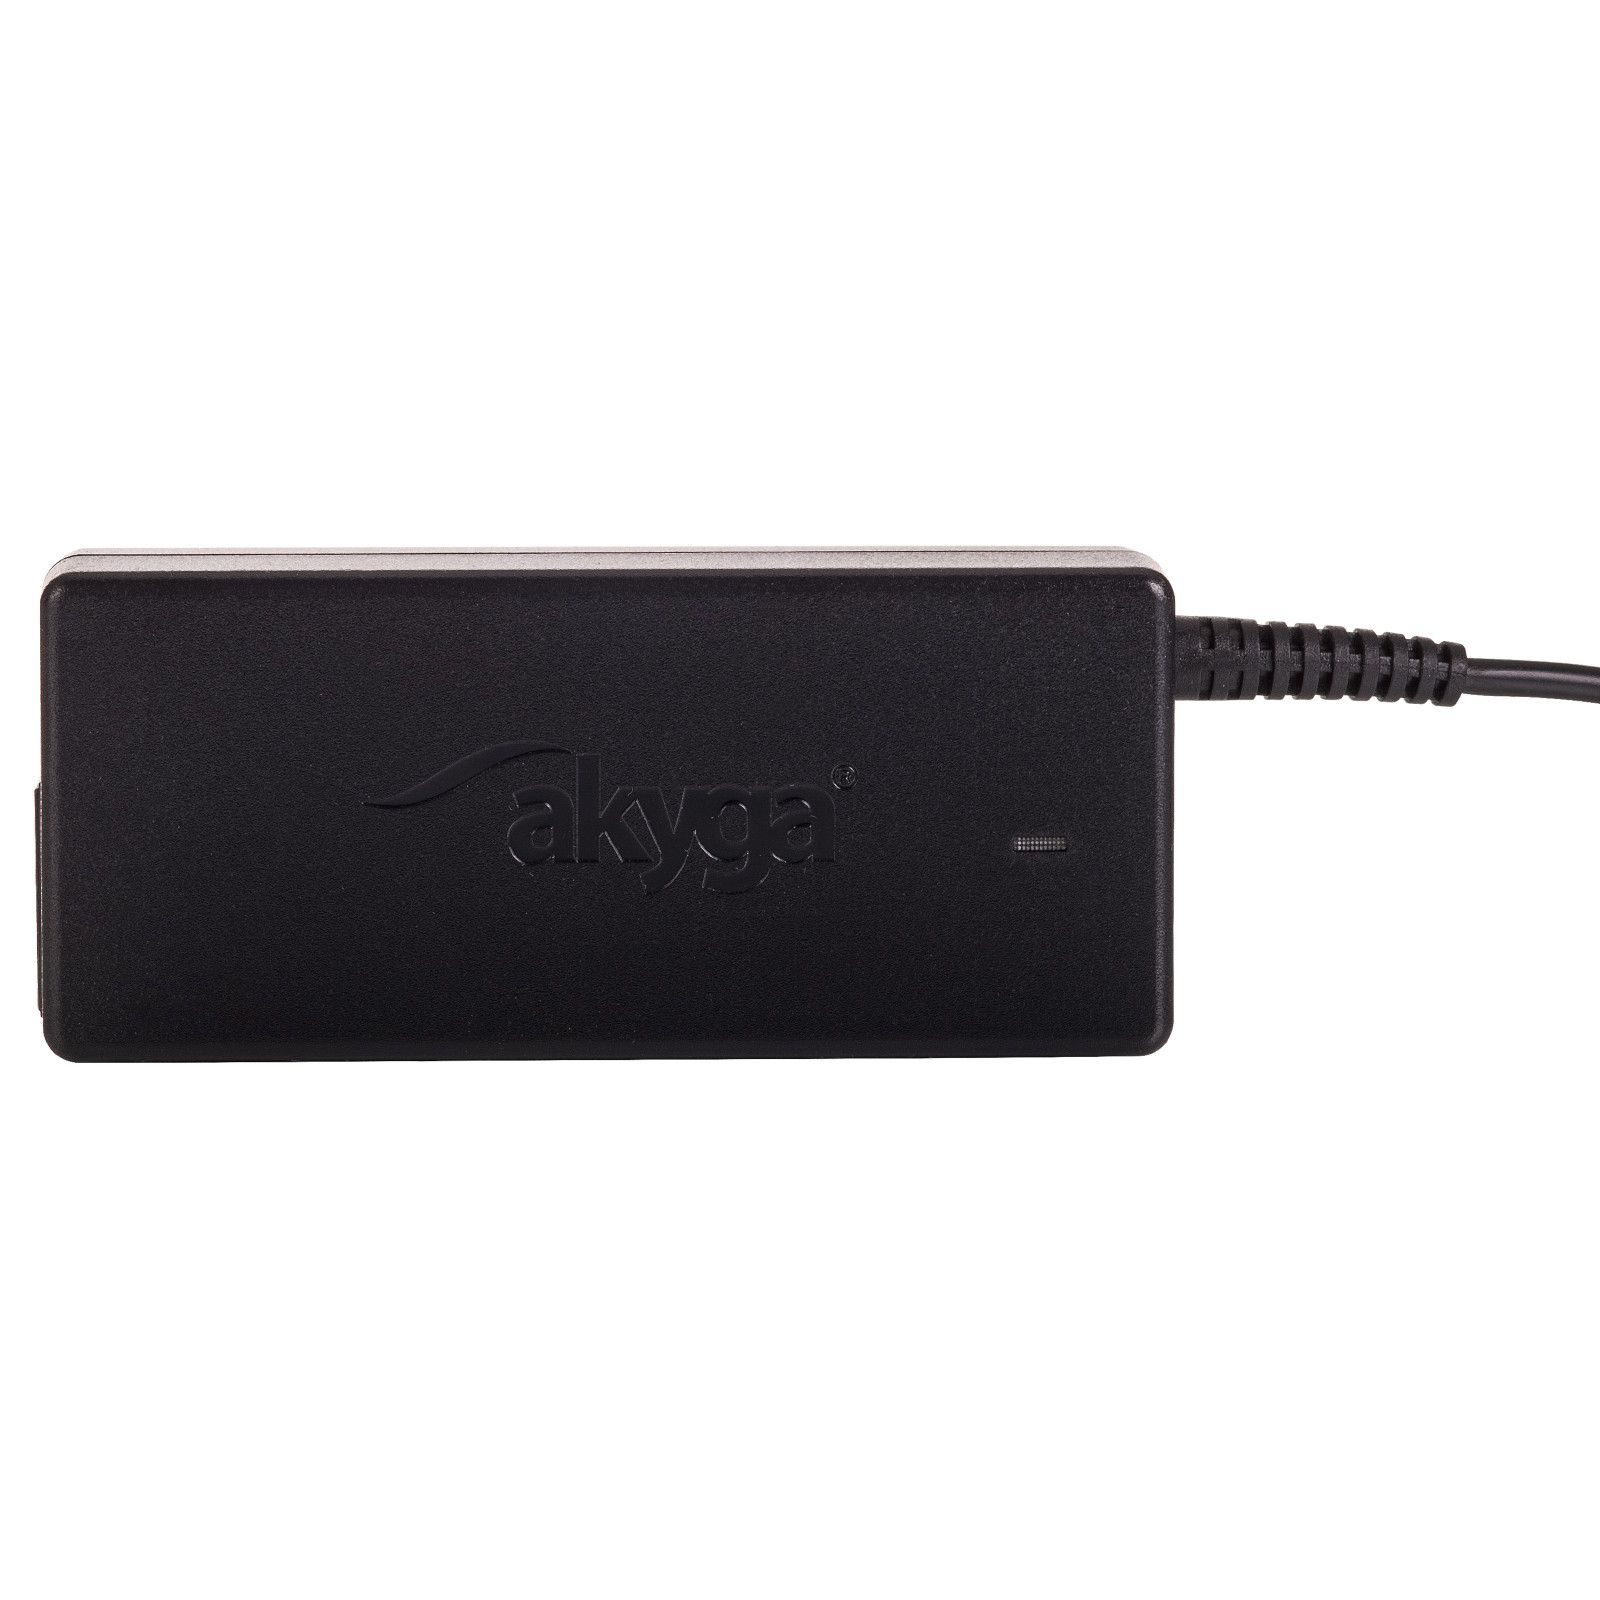 Akyga notebook power adapter AK-ND-08 19V/4.74A 90W 4.8x1.7 mm HP power adapter/inverter Indoor Black_5